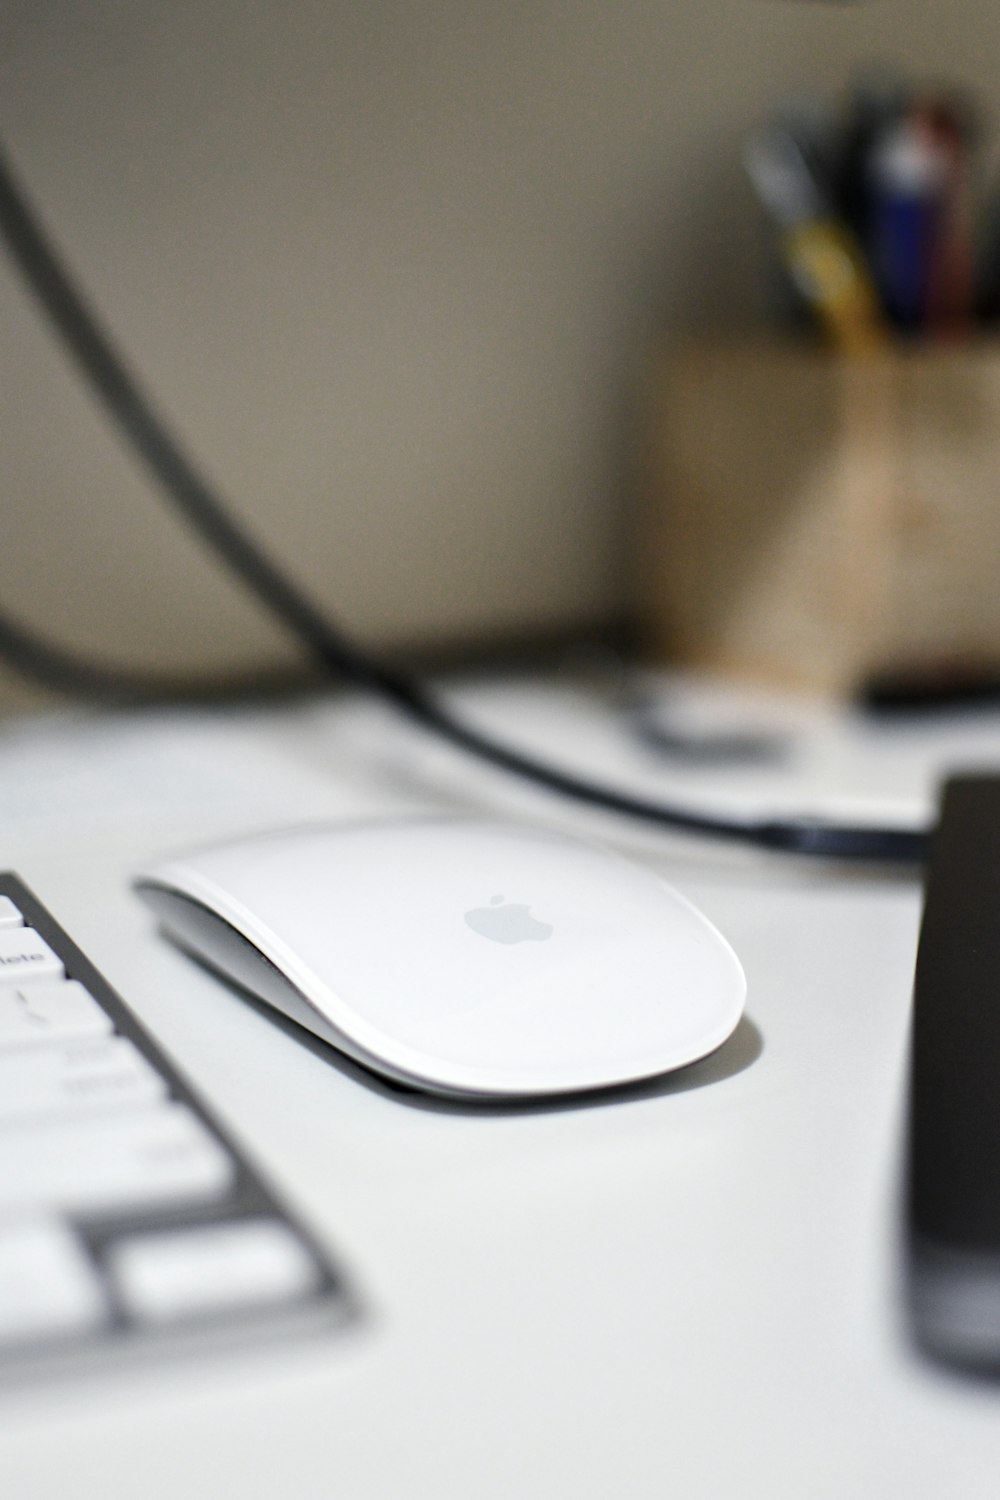 a computer mouse sitting on top of a white desk